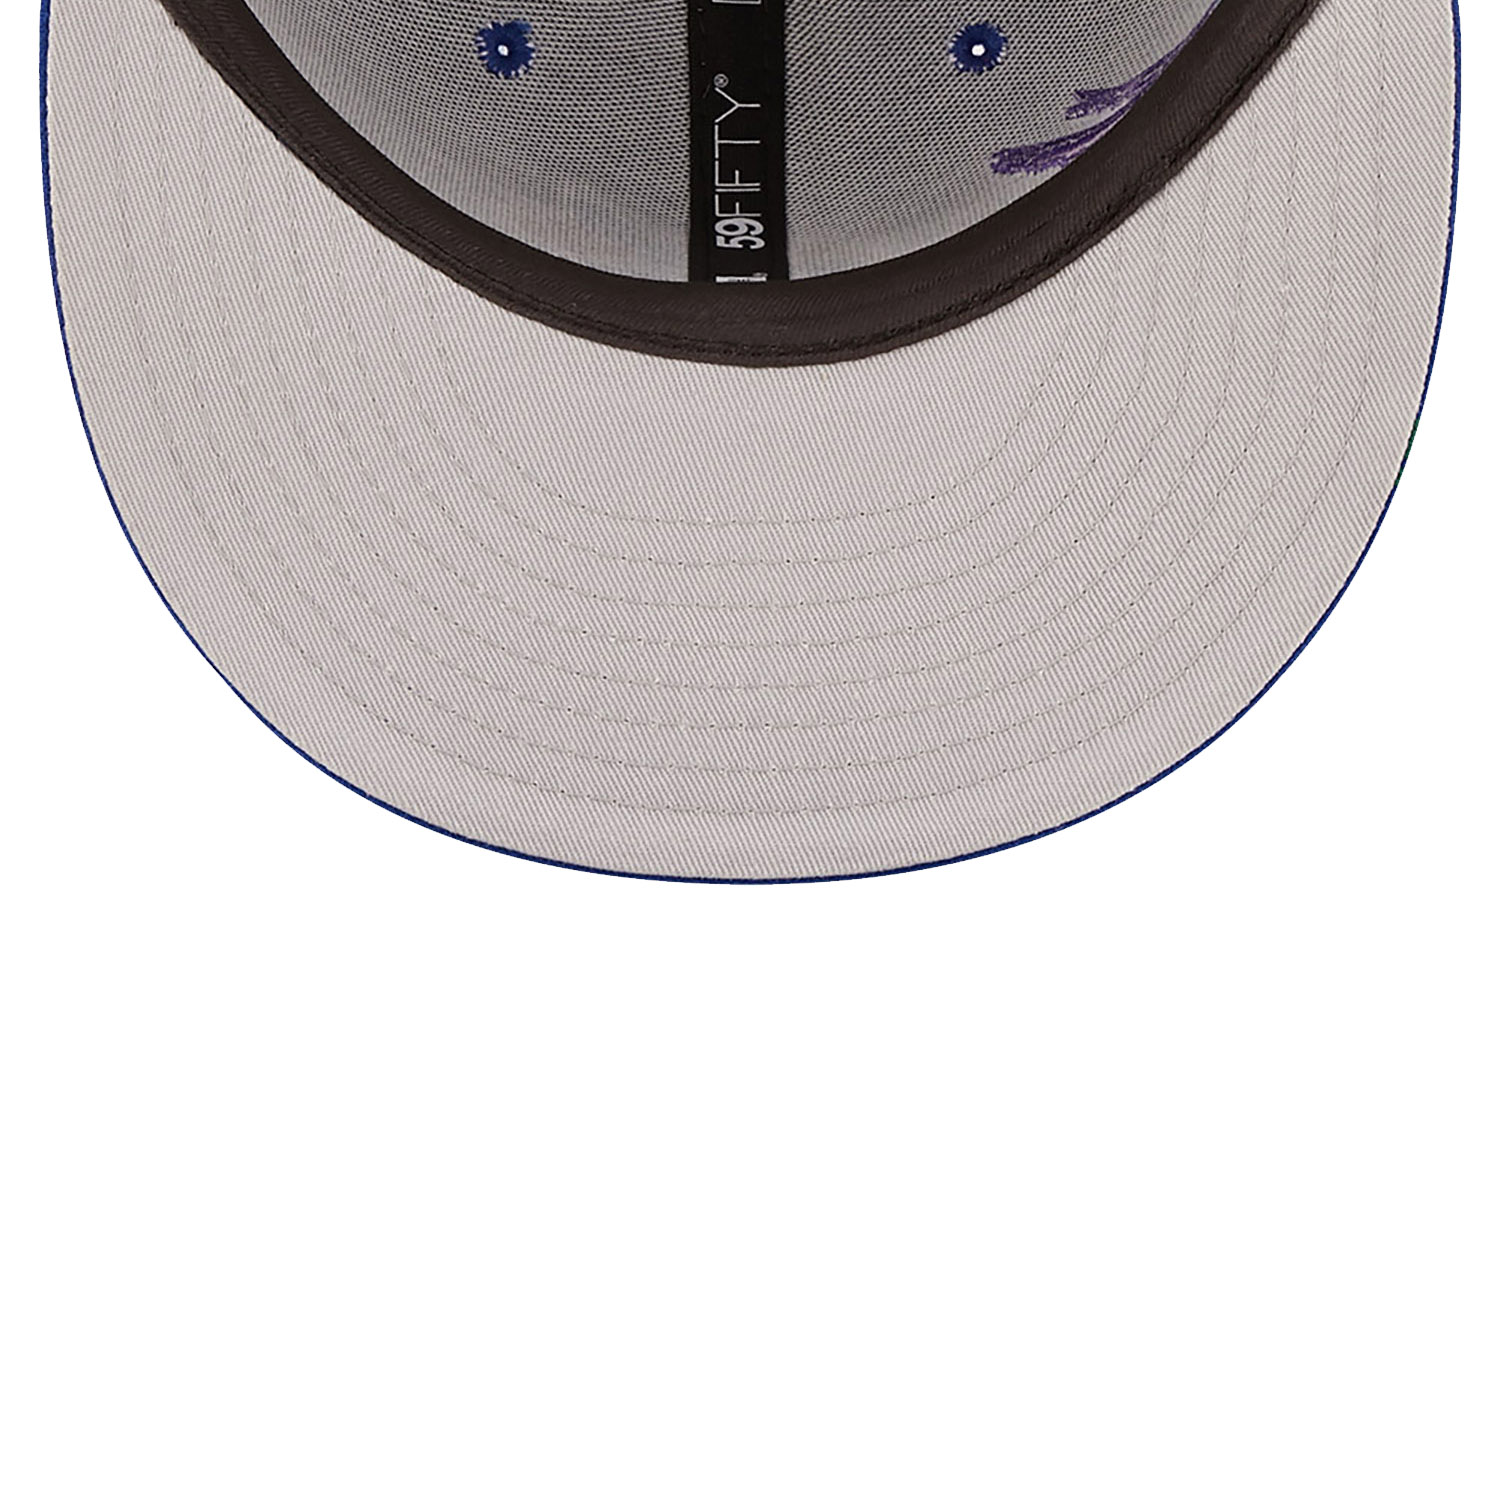 Toronto Blue Jays MLB Blooming Blue 59FIFTY Fitted Cap